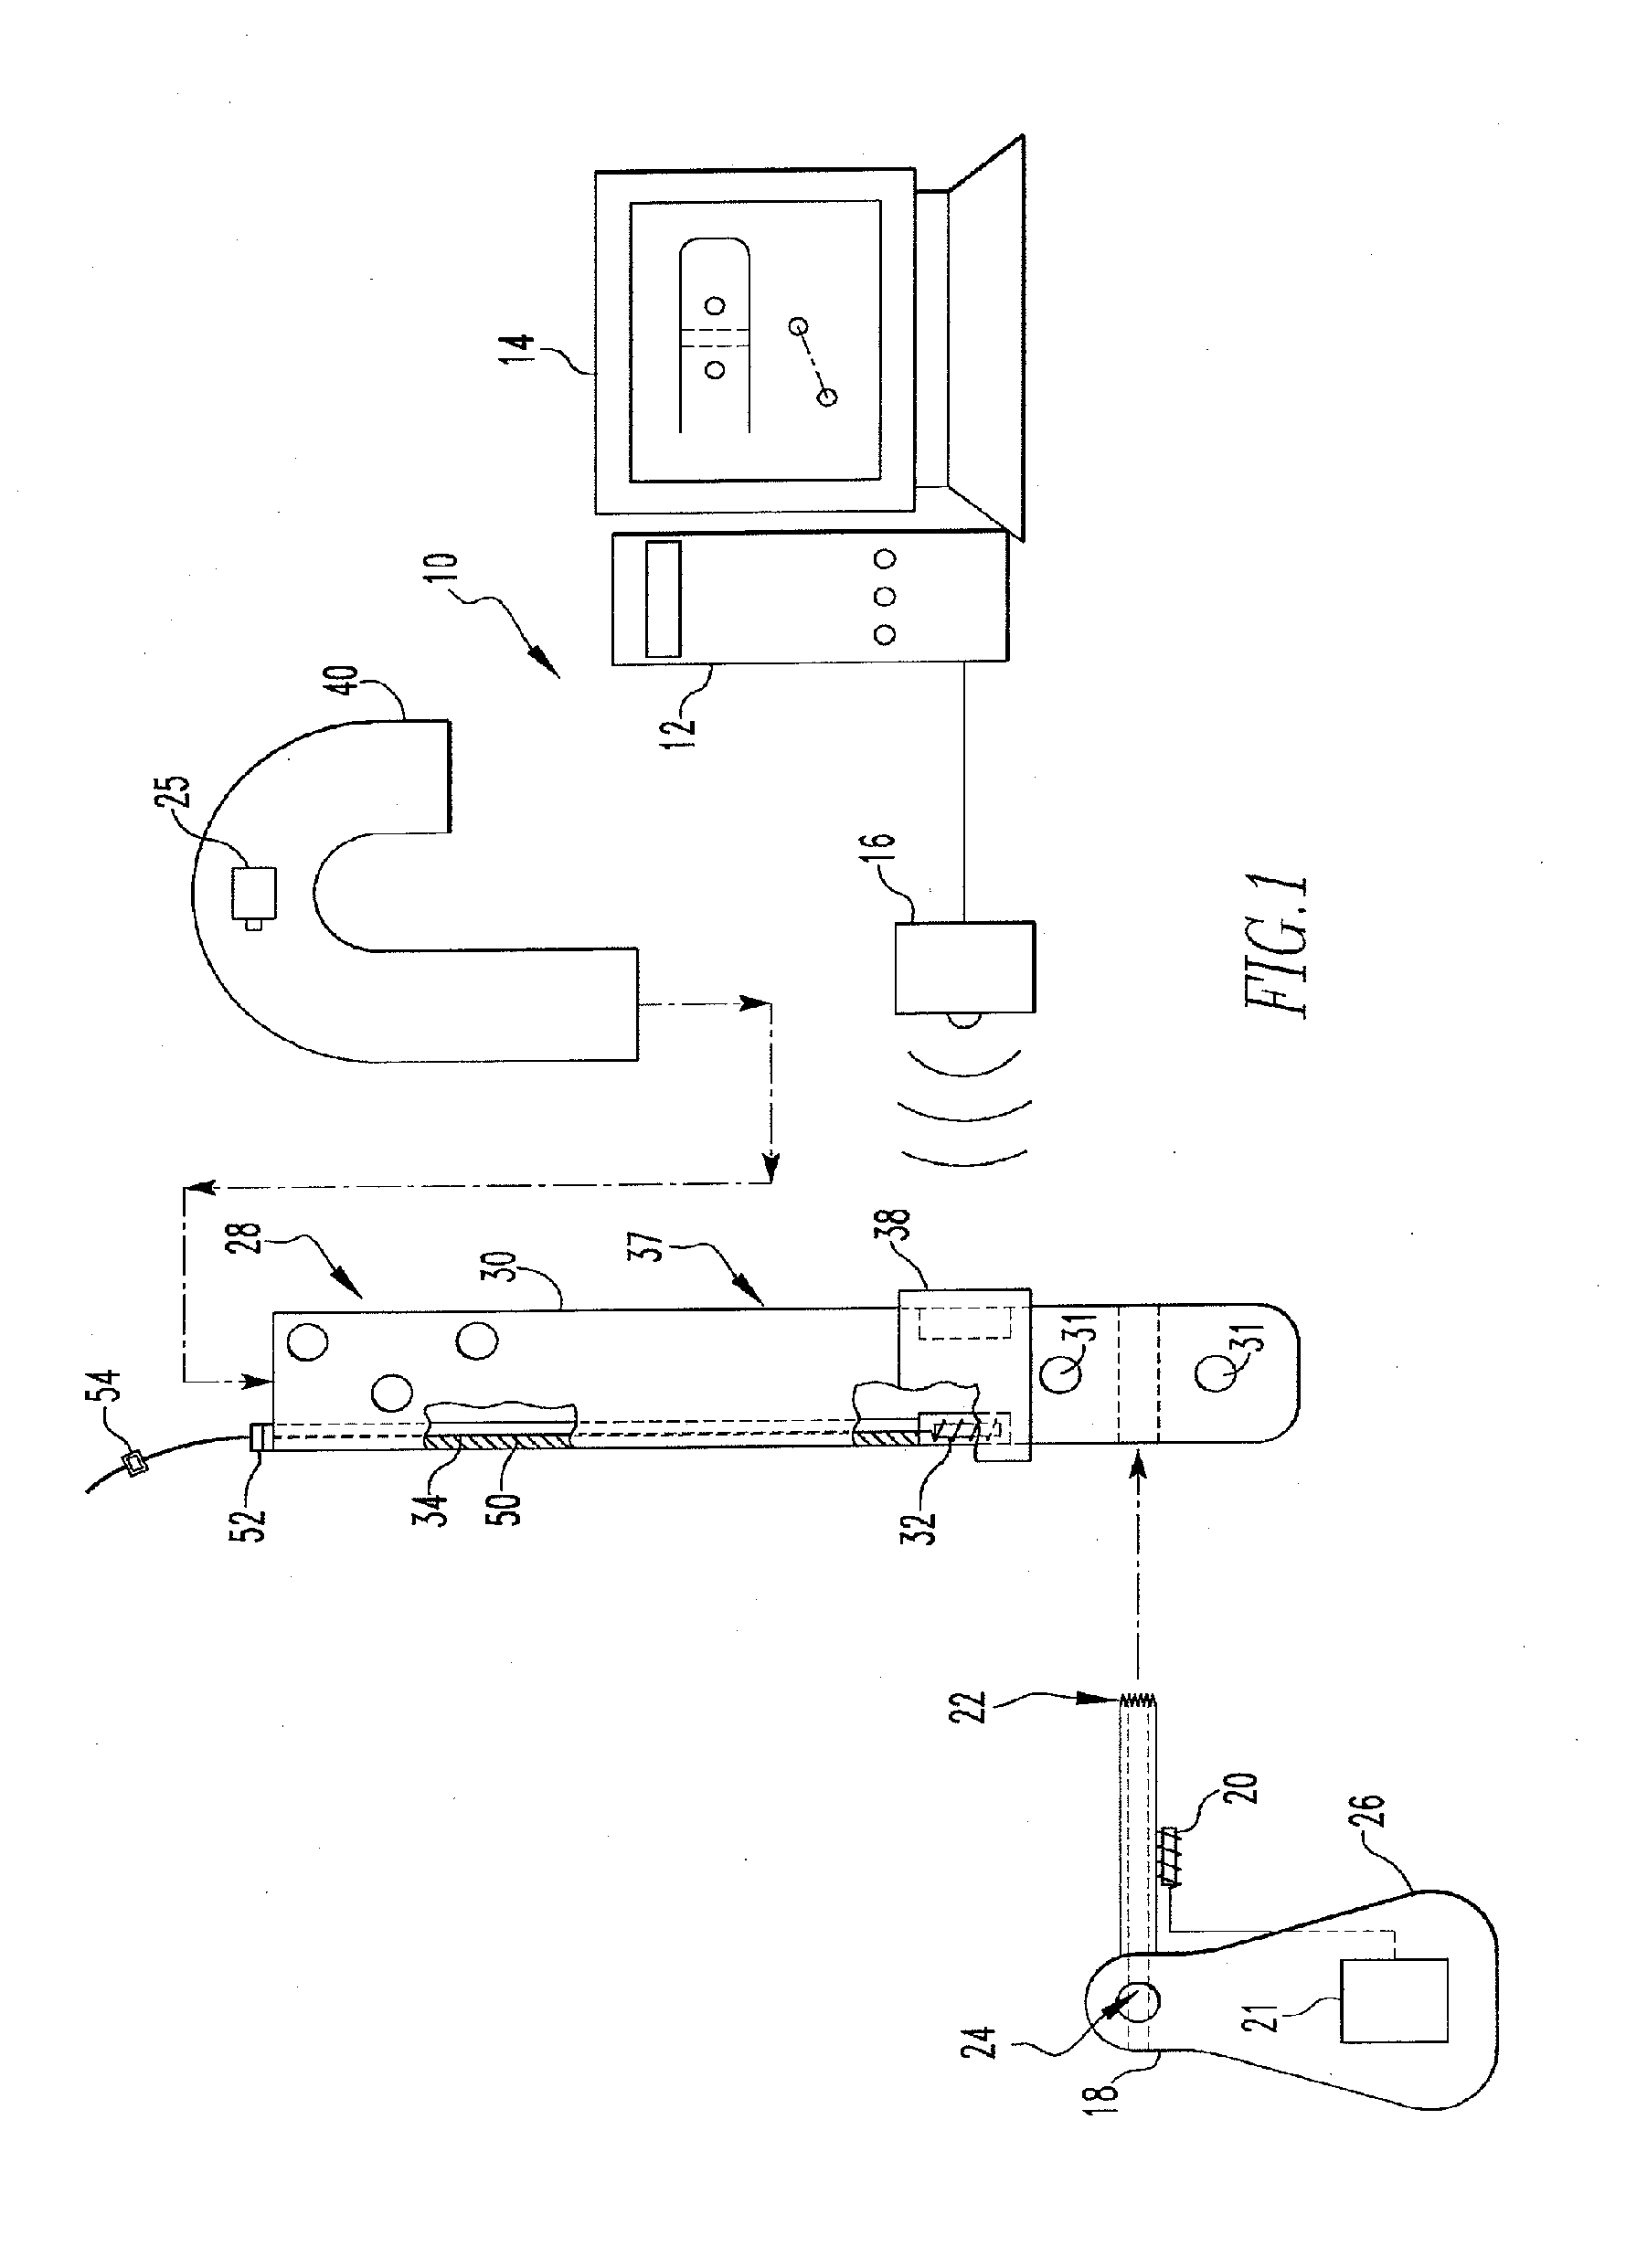 System and Method for Identifying a Landmark